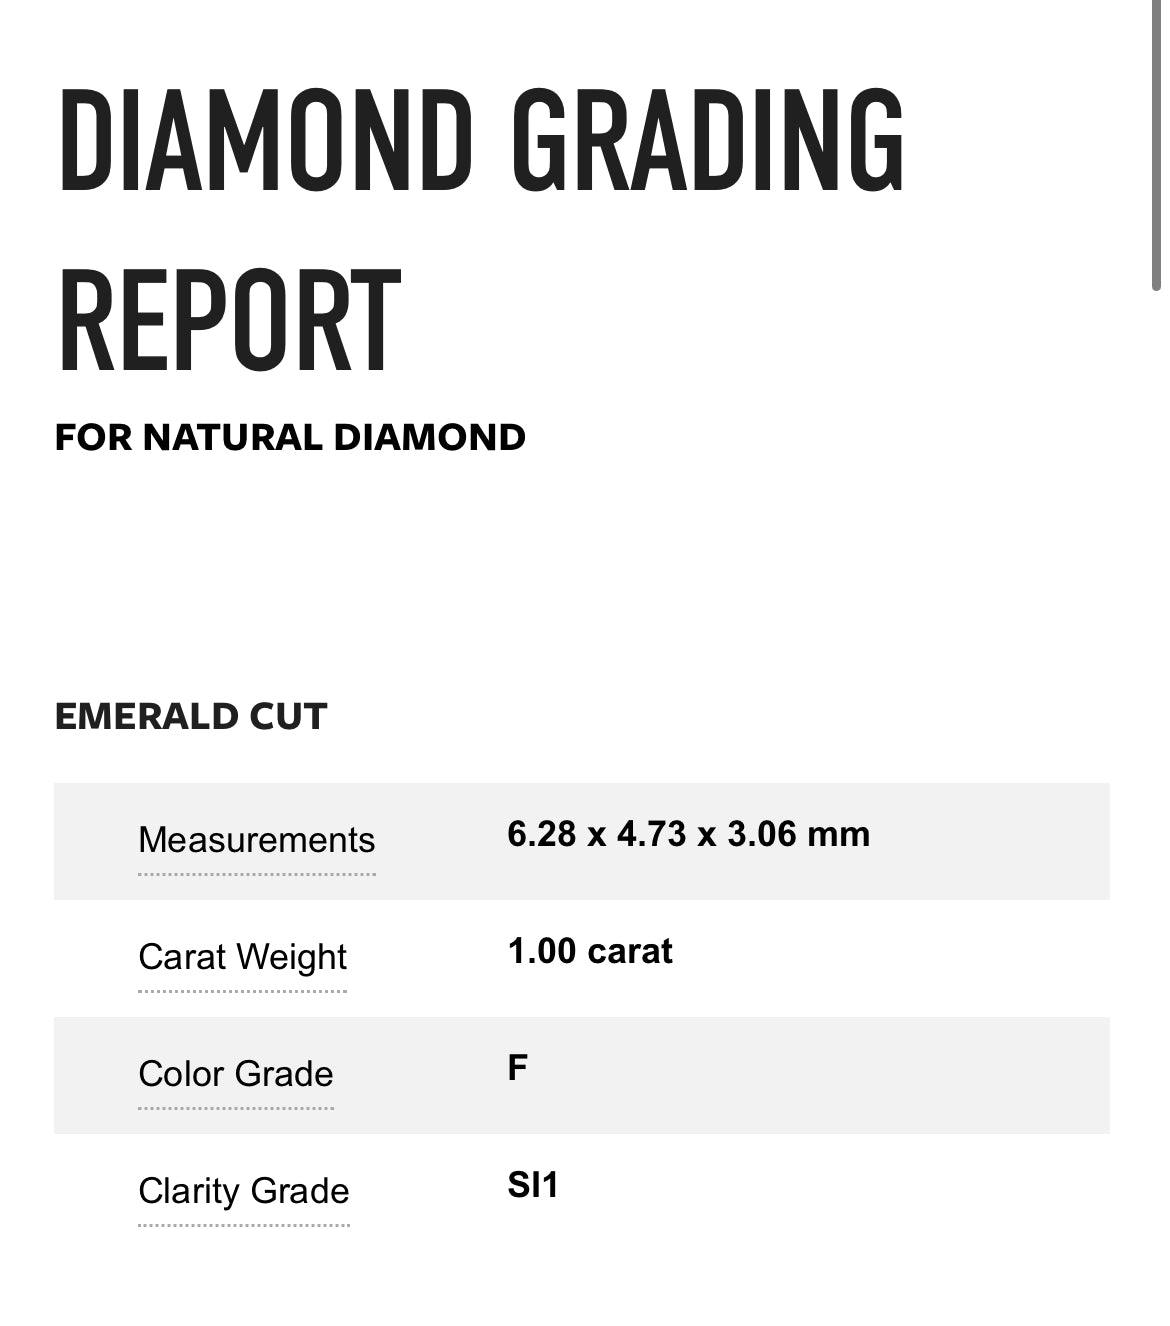 1.00 Carat Emerald Cut Diamond F , S1 , GIA CERTIFICATE 2176392045  // Available For Purchase call 619-234-1423